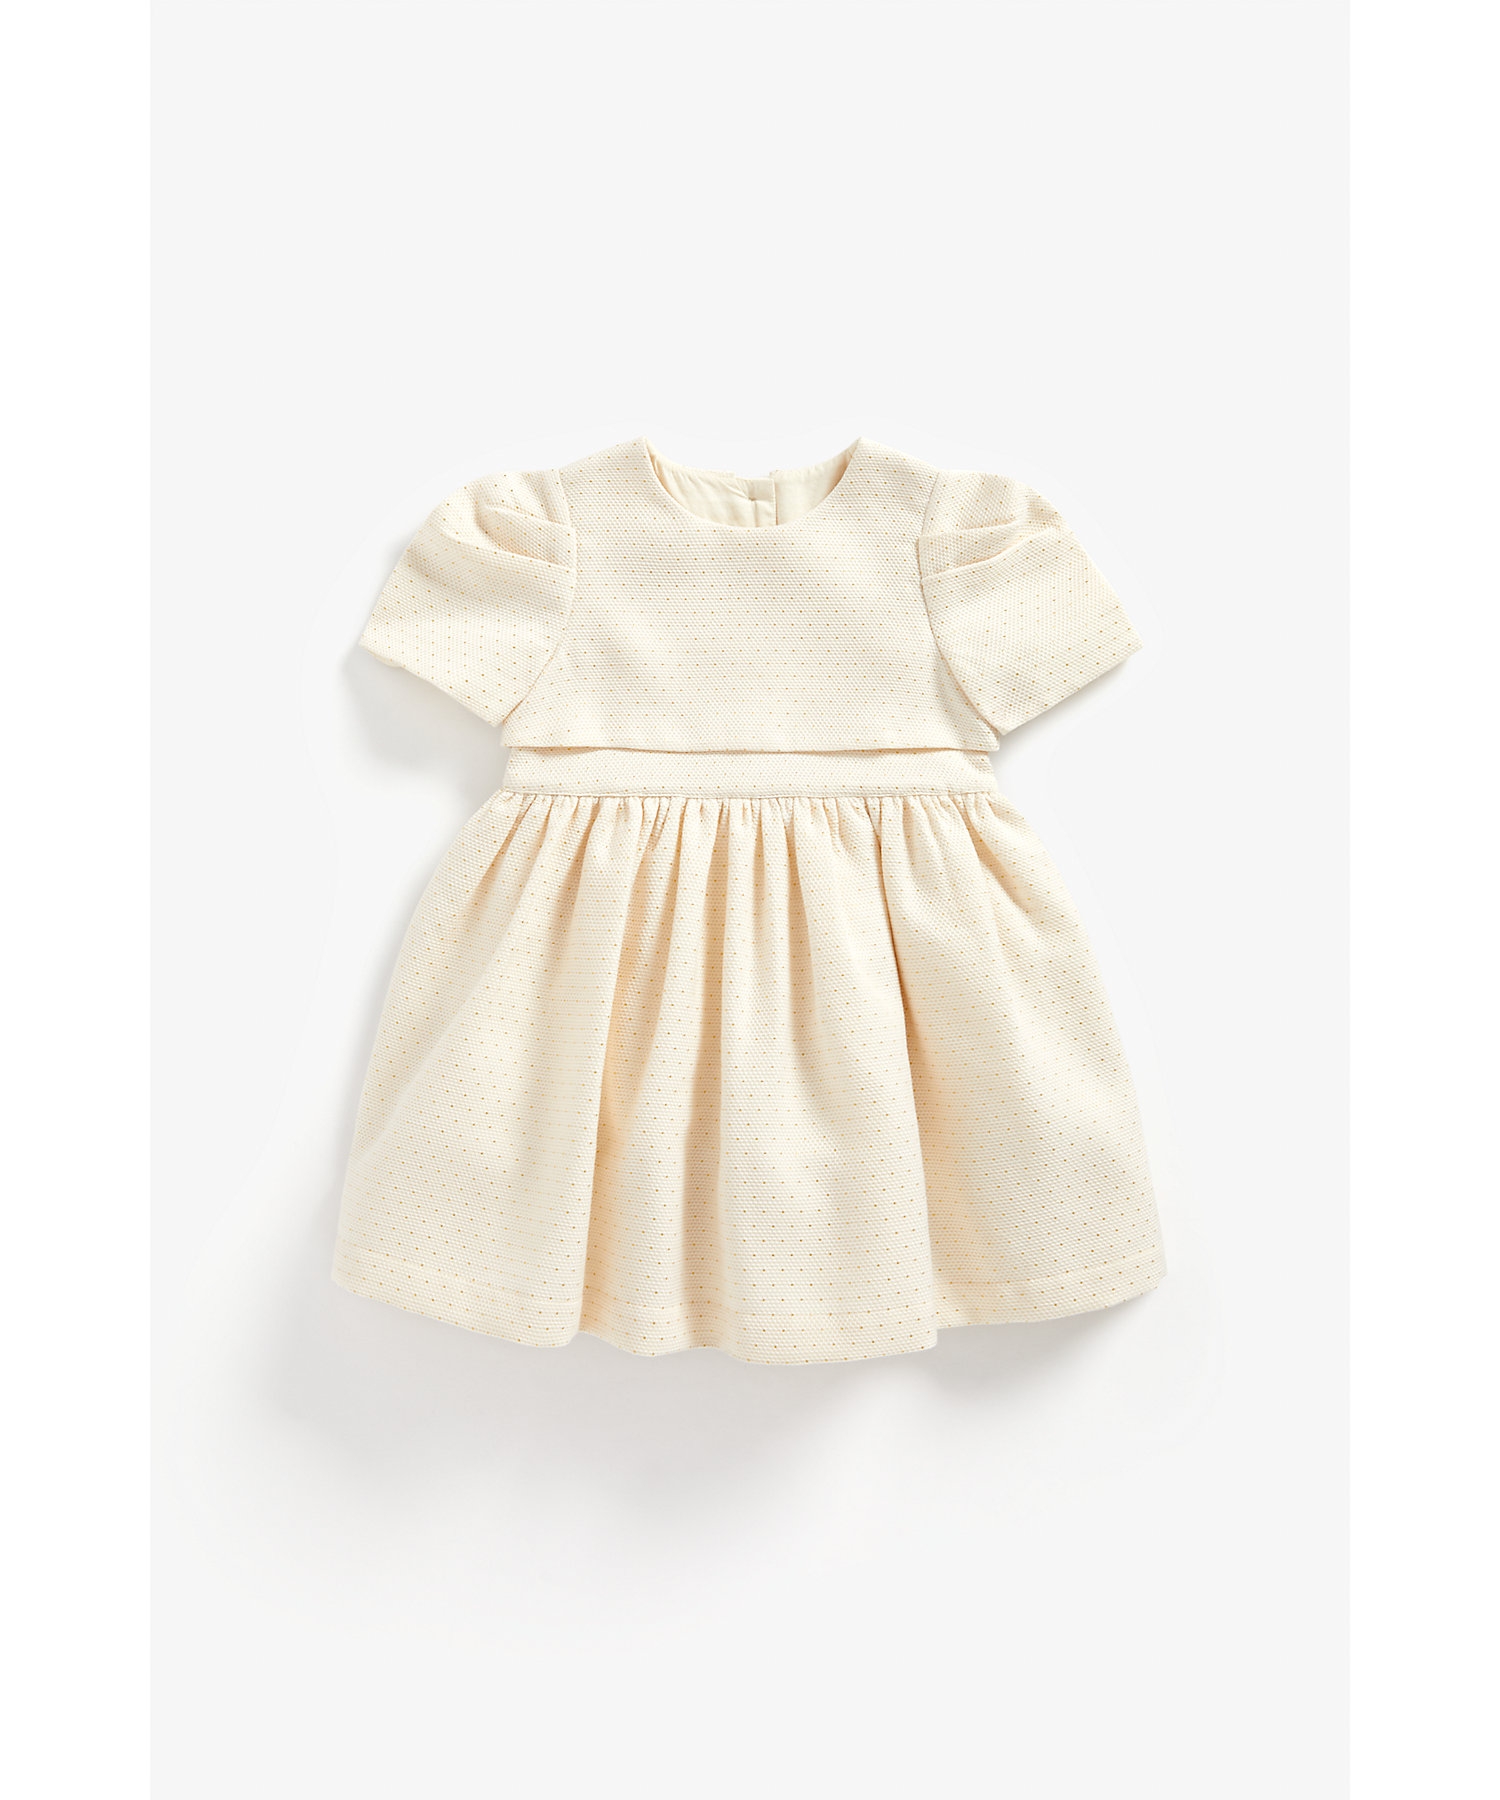 Mothercare | Girls Half Sleeves Party Dress With Bow - Cream